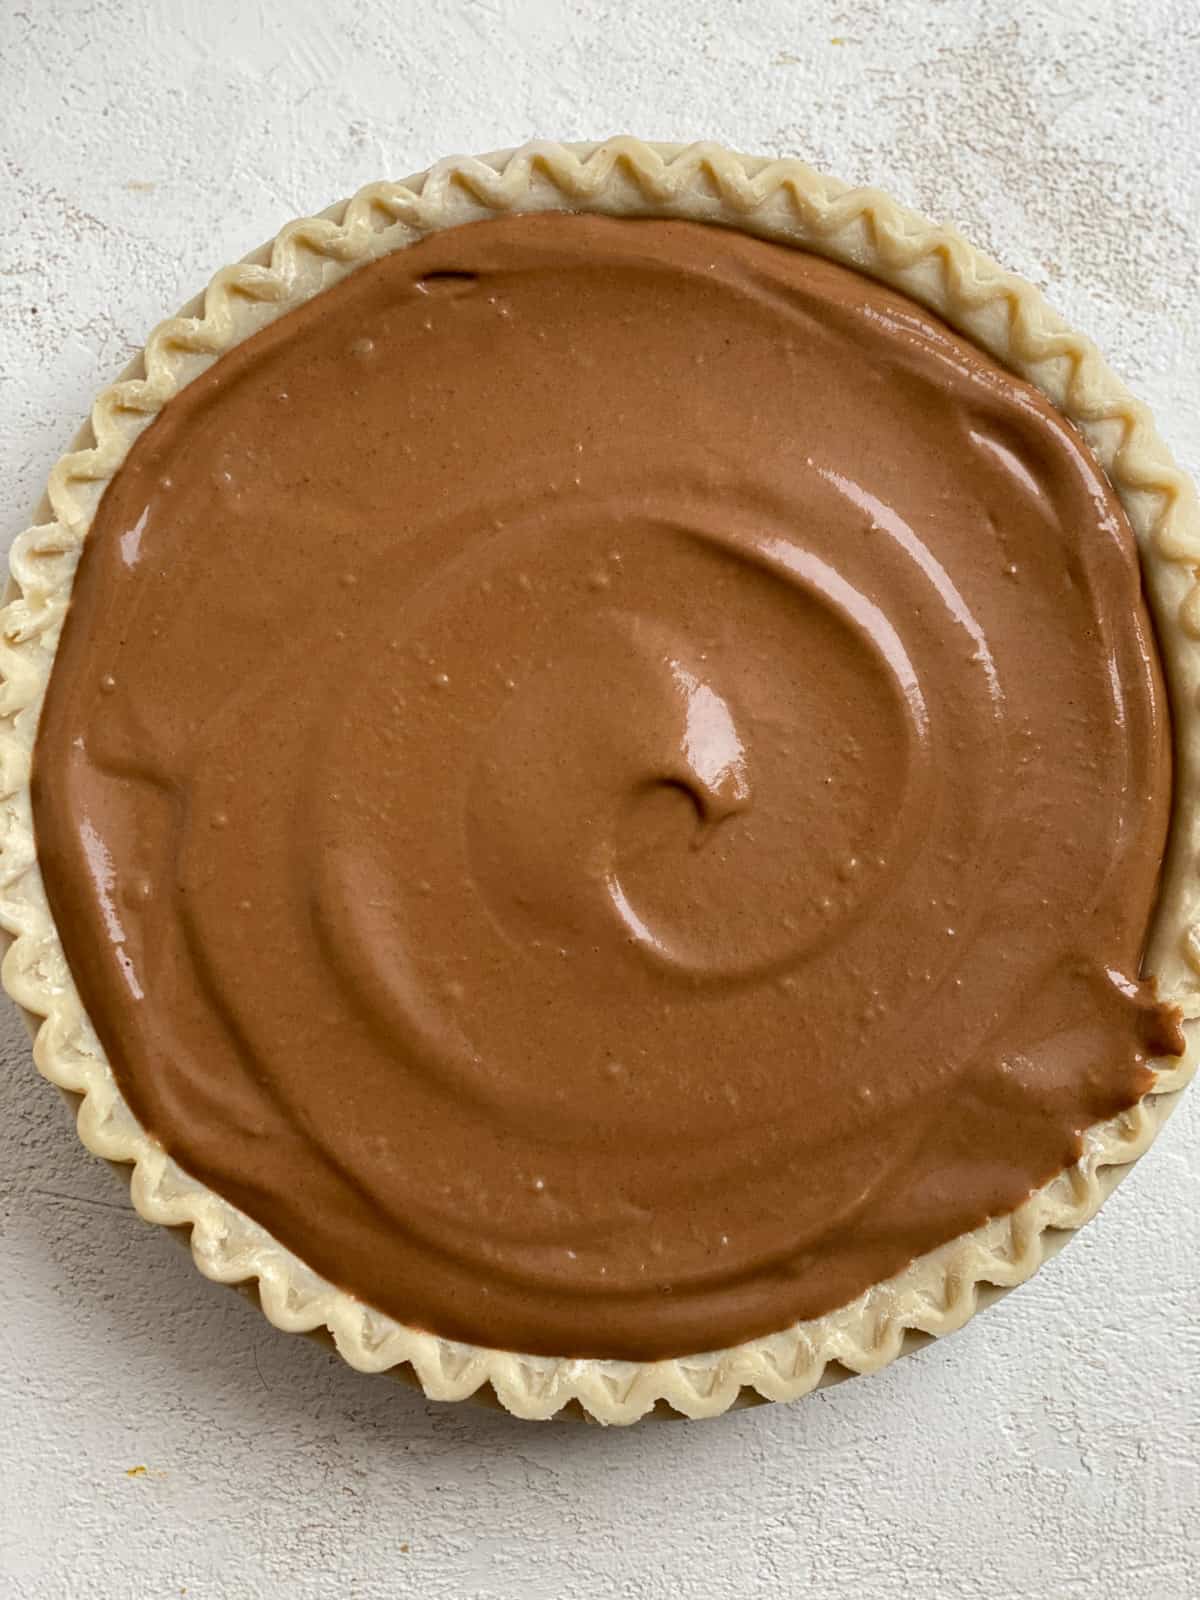 completed Chocolate Pumpkin Pie against a white surface